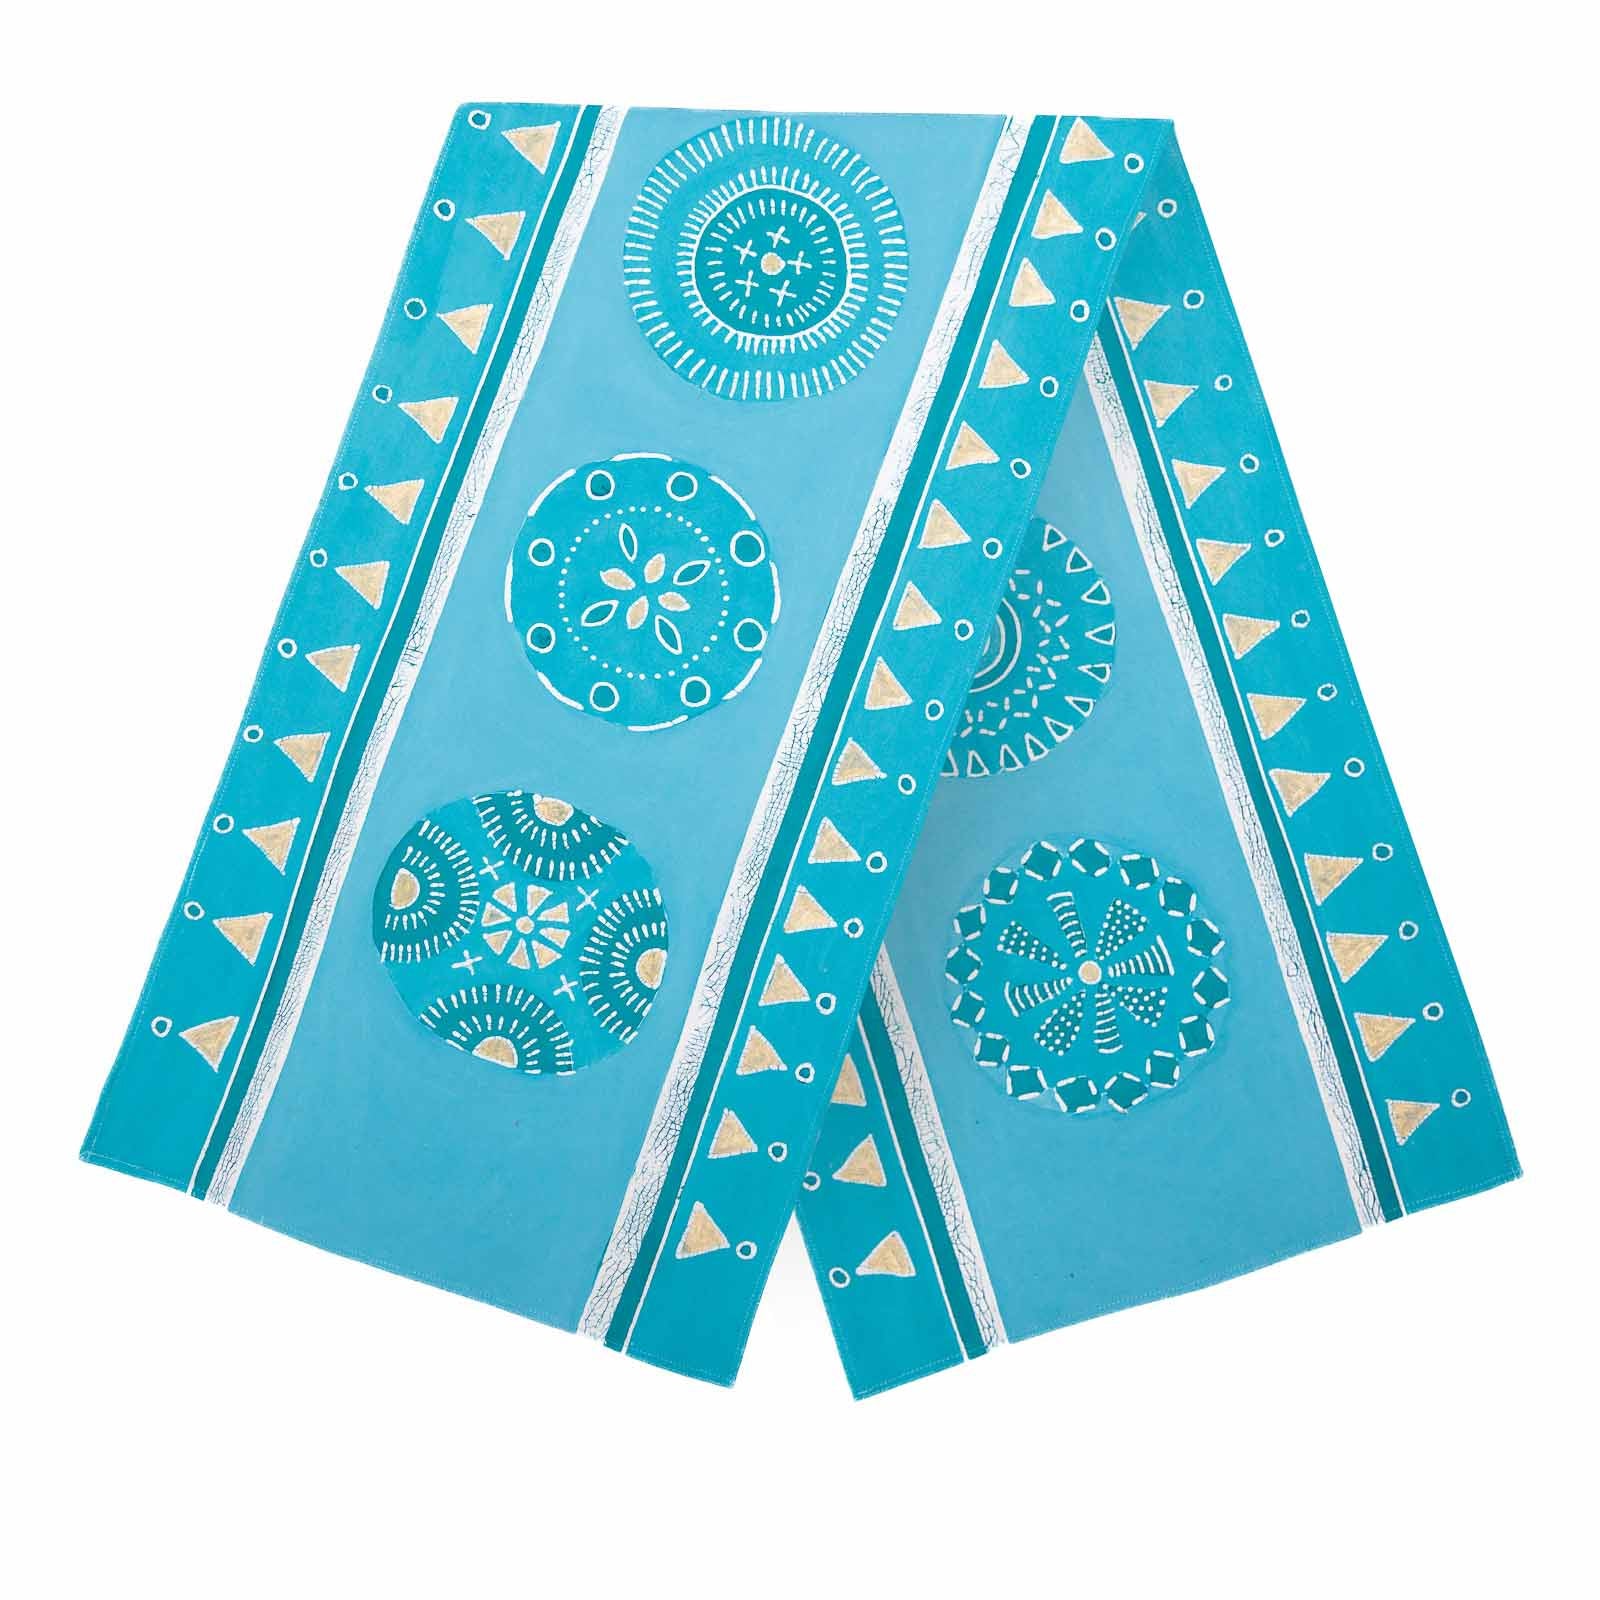 Kuosi Aqua Table Runner - Hand Painted by TRIBAL TEXTILES - Handcrafted Home Decor Interiors - African Made